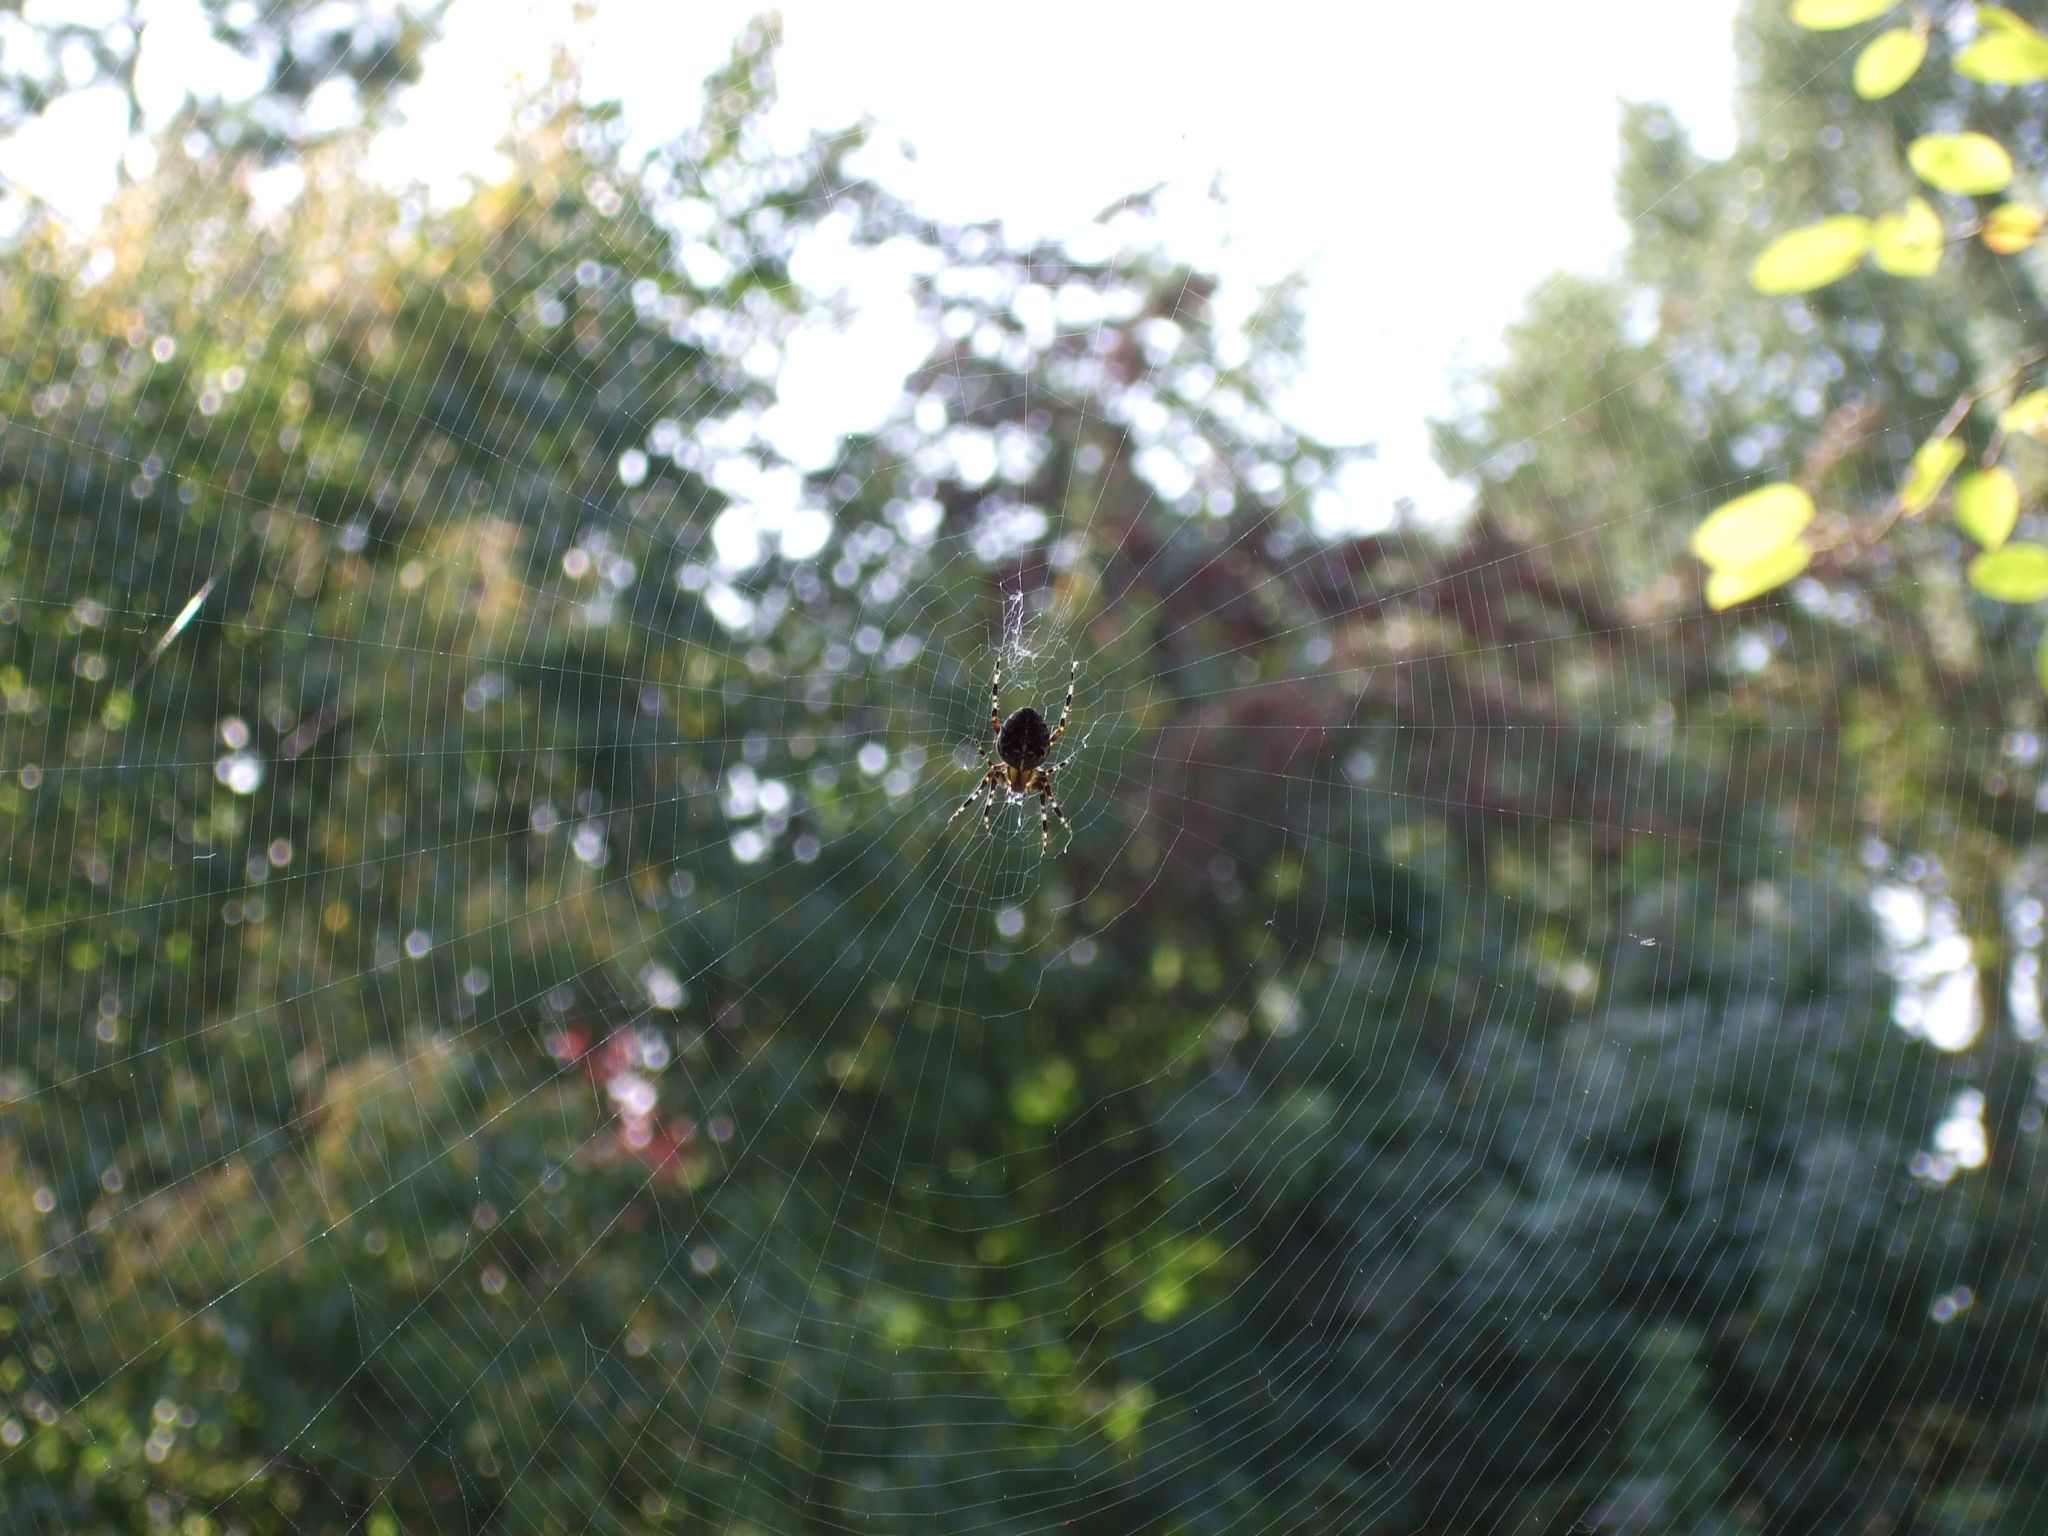 Photo 5 of 23 from the album Spiders.